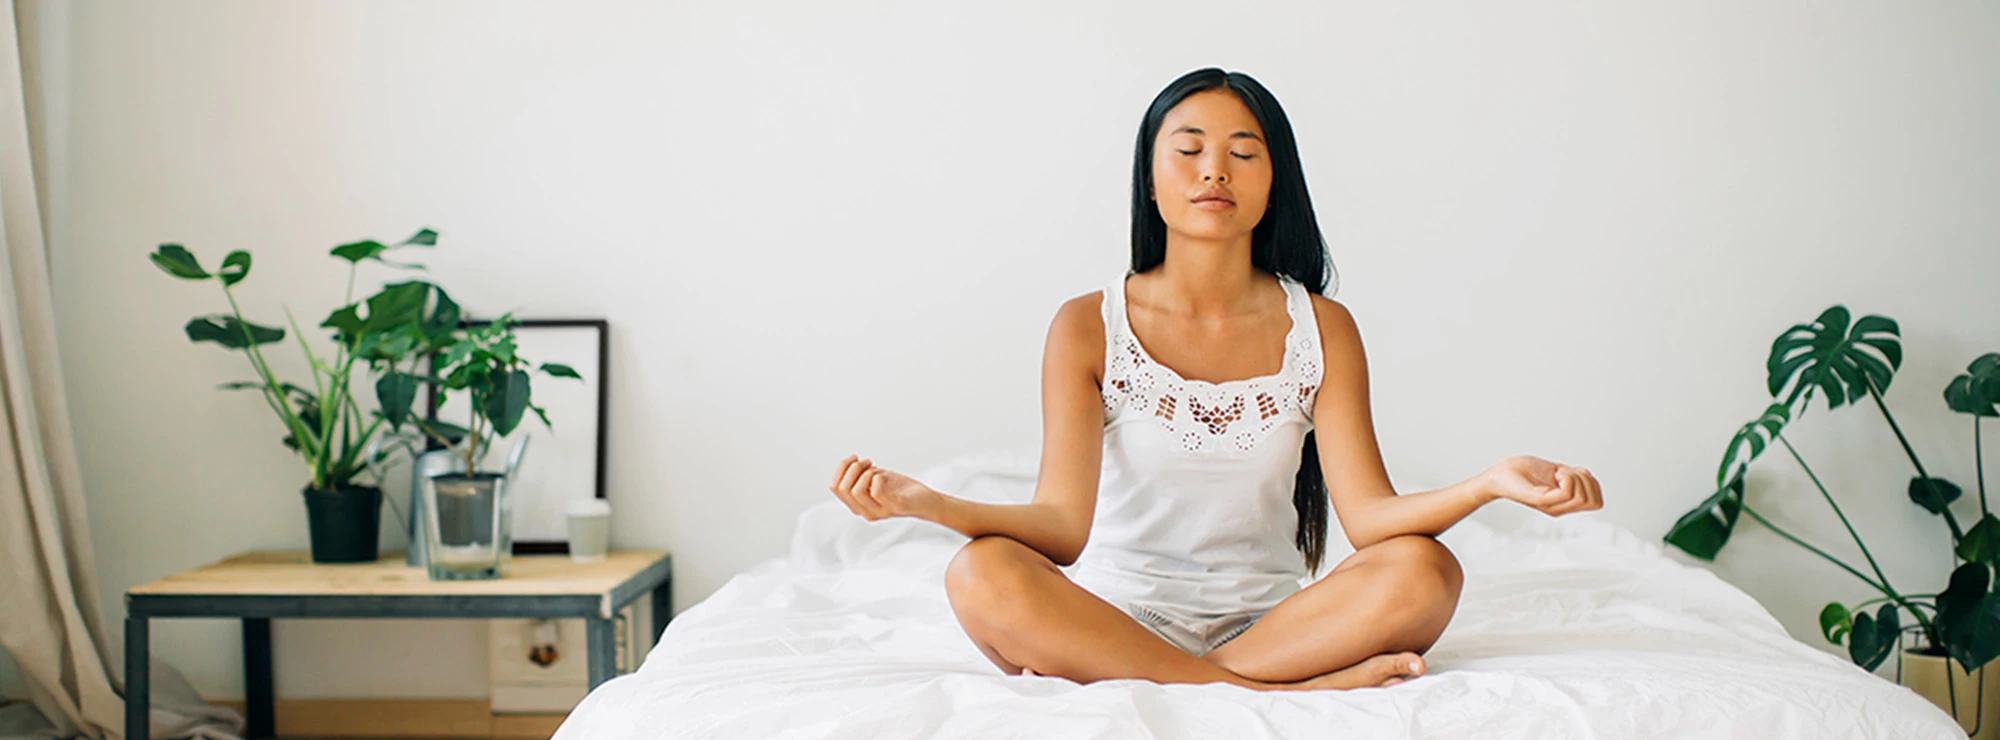 Young woman meditating on bed